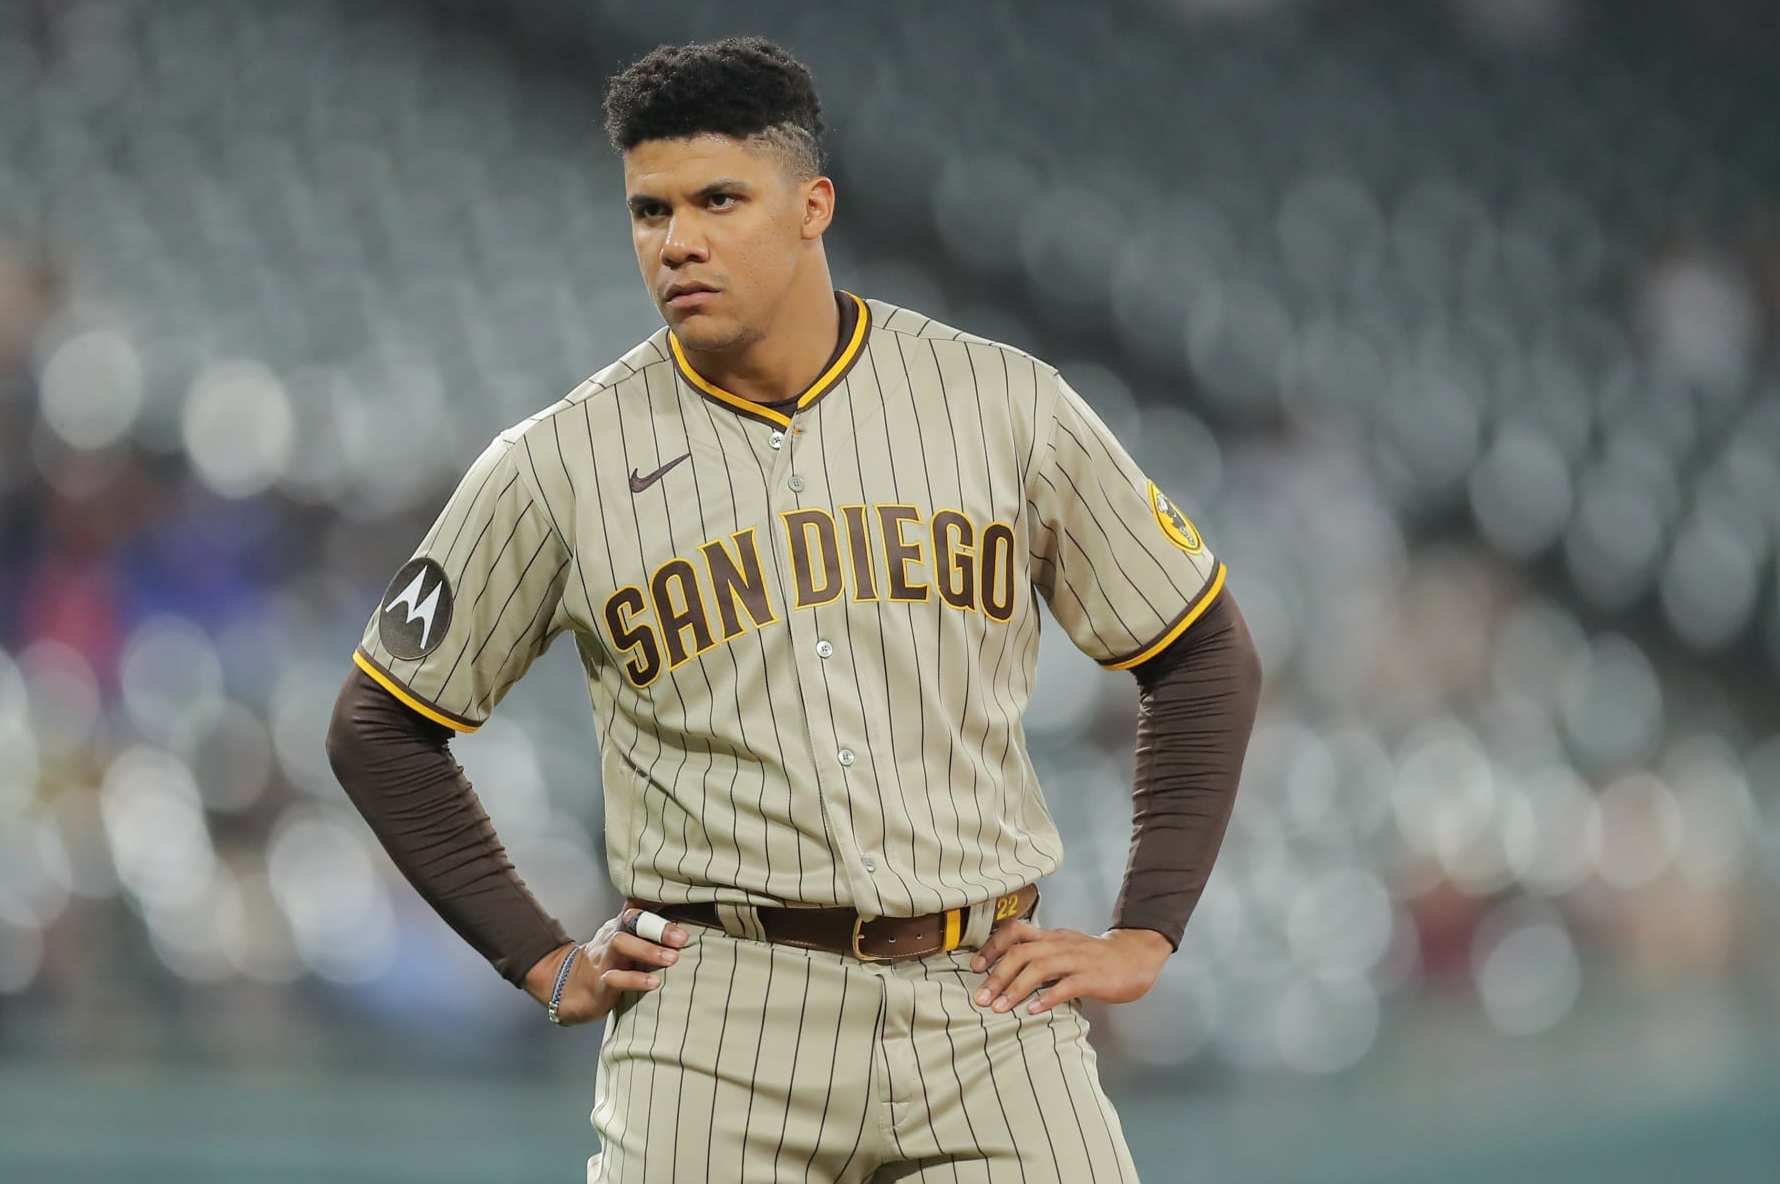 Padres uniforms the second worst uniforms in MLB - Gaslamp Ball